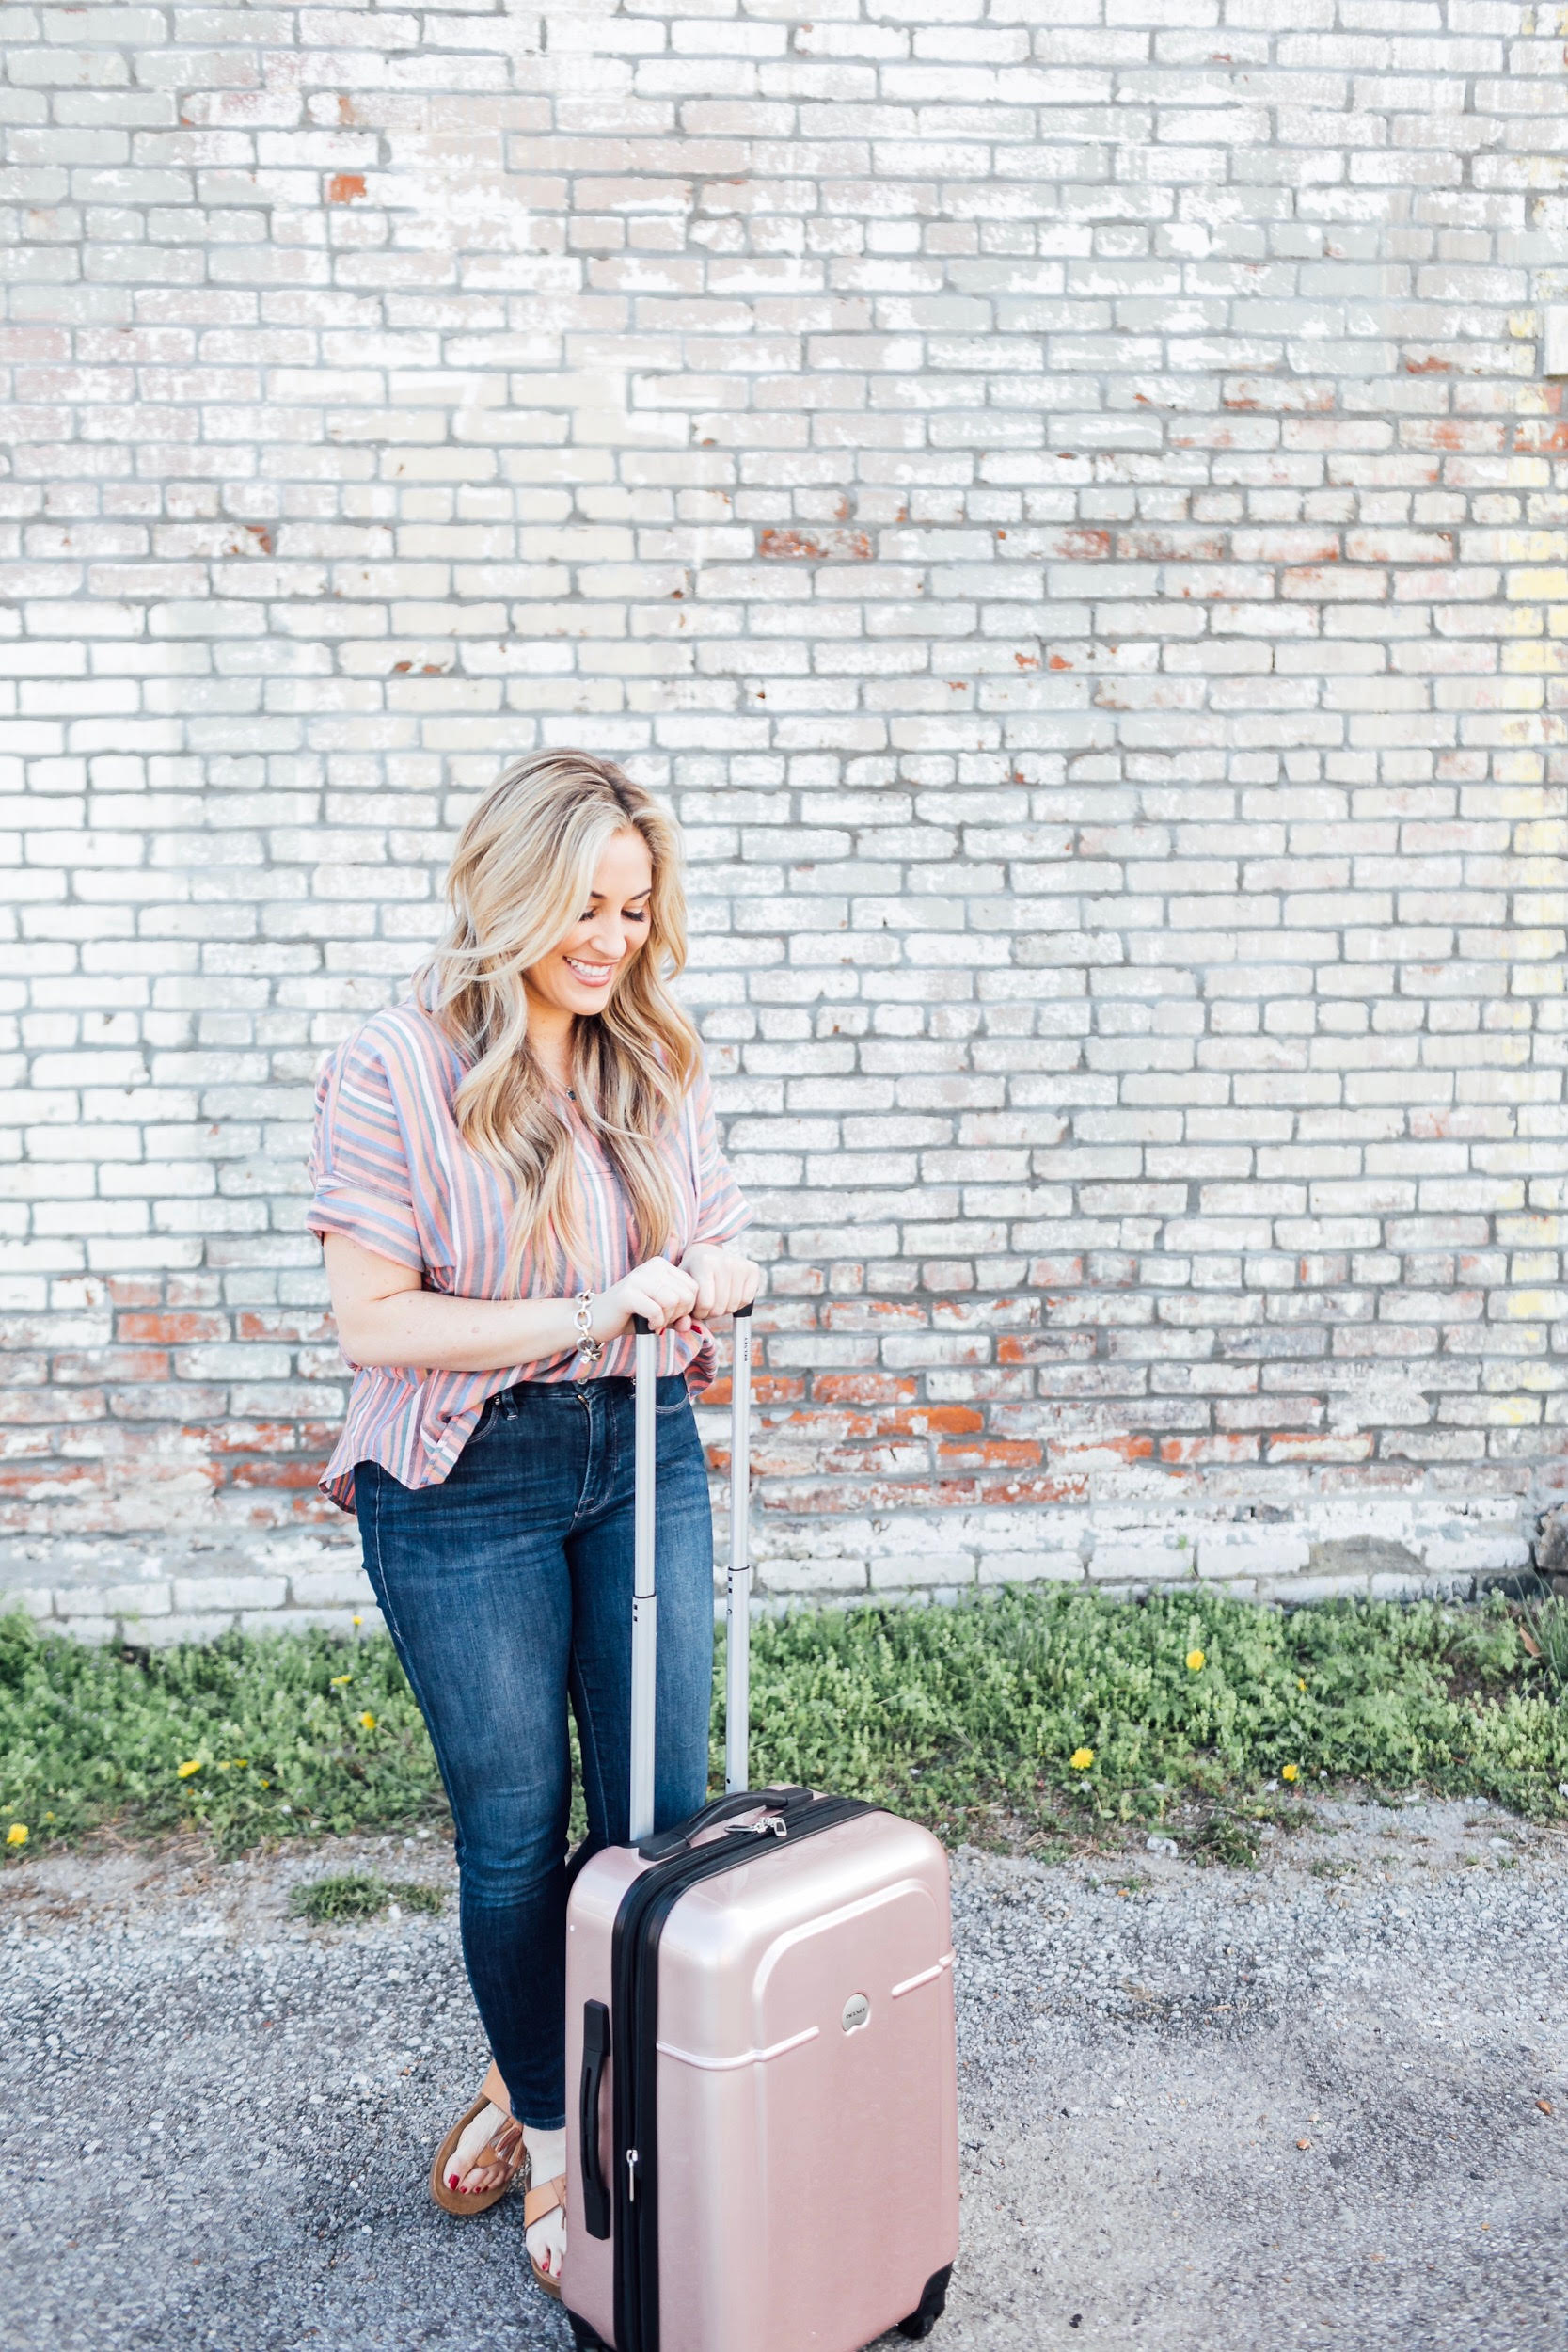 A Complete Spring Trip Packing List - Walking in Memphis in High Heels